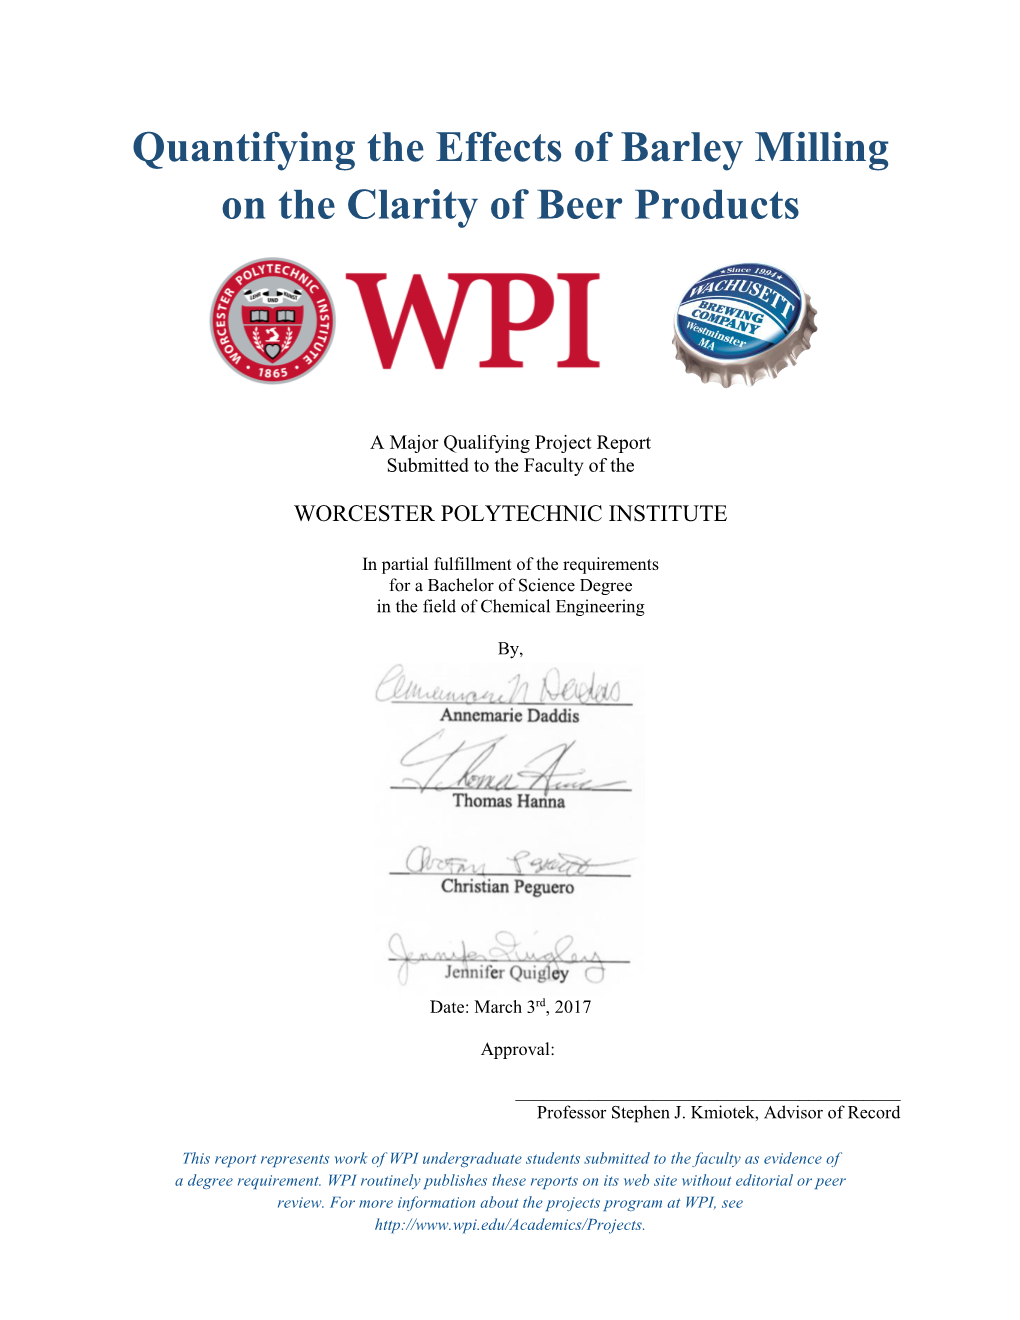 Quantifying the Effects of Barley Milling on the Clarity of Beer Products